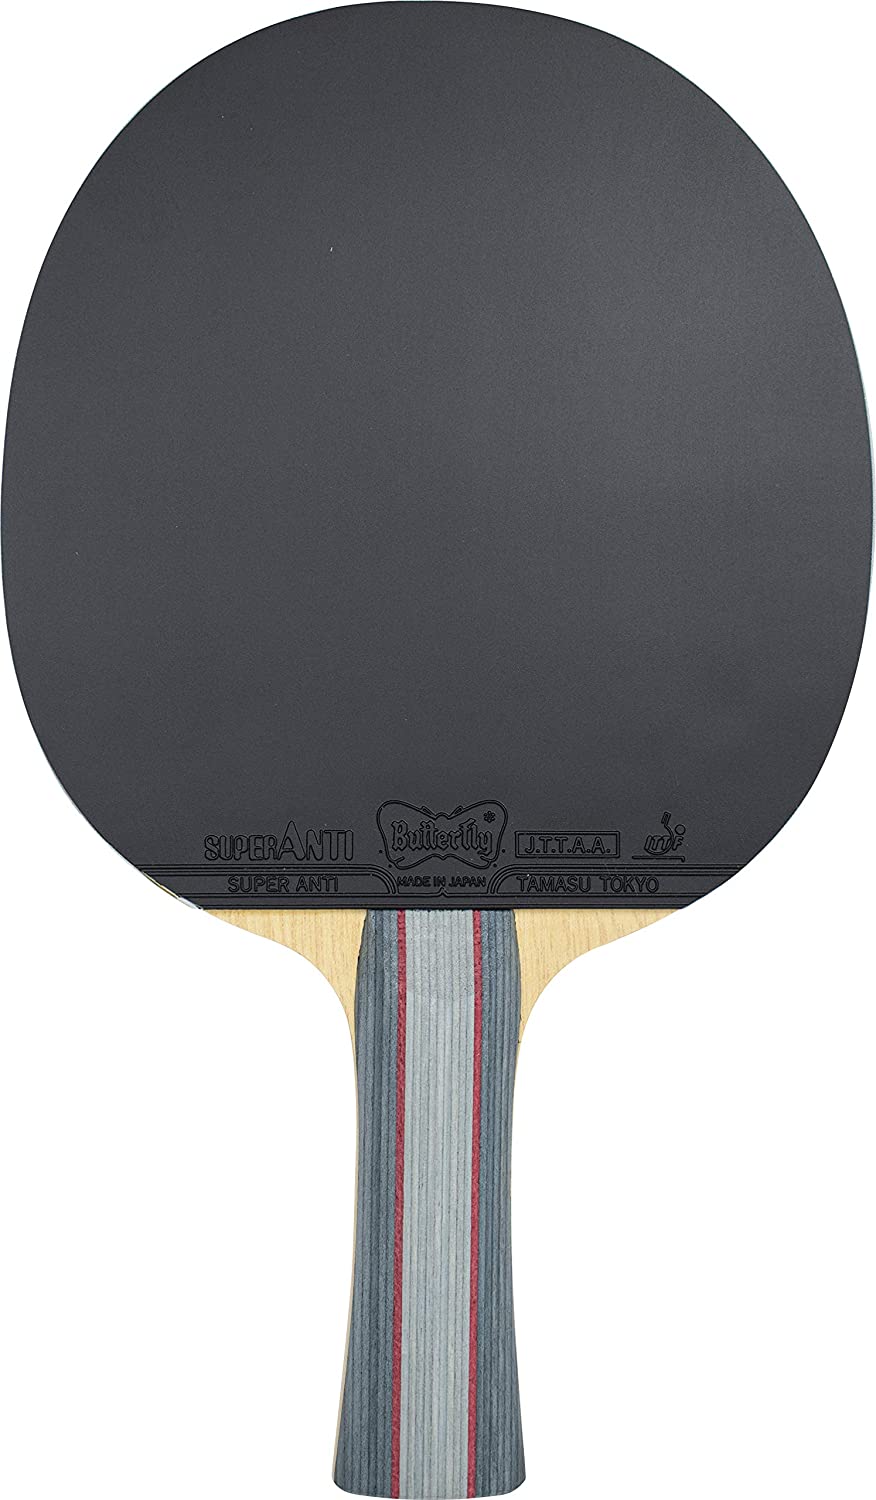 Butterfly Super Anti Table Tennis Rubber (Black)